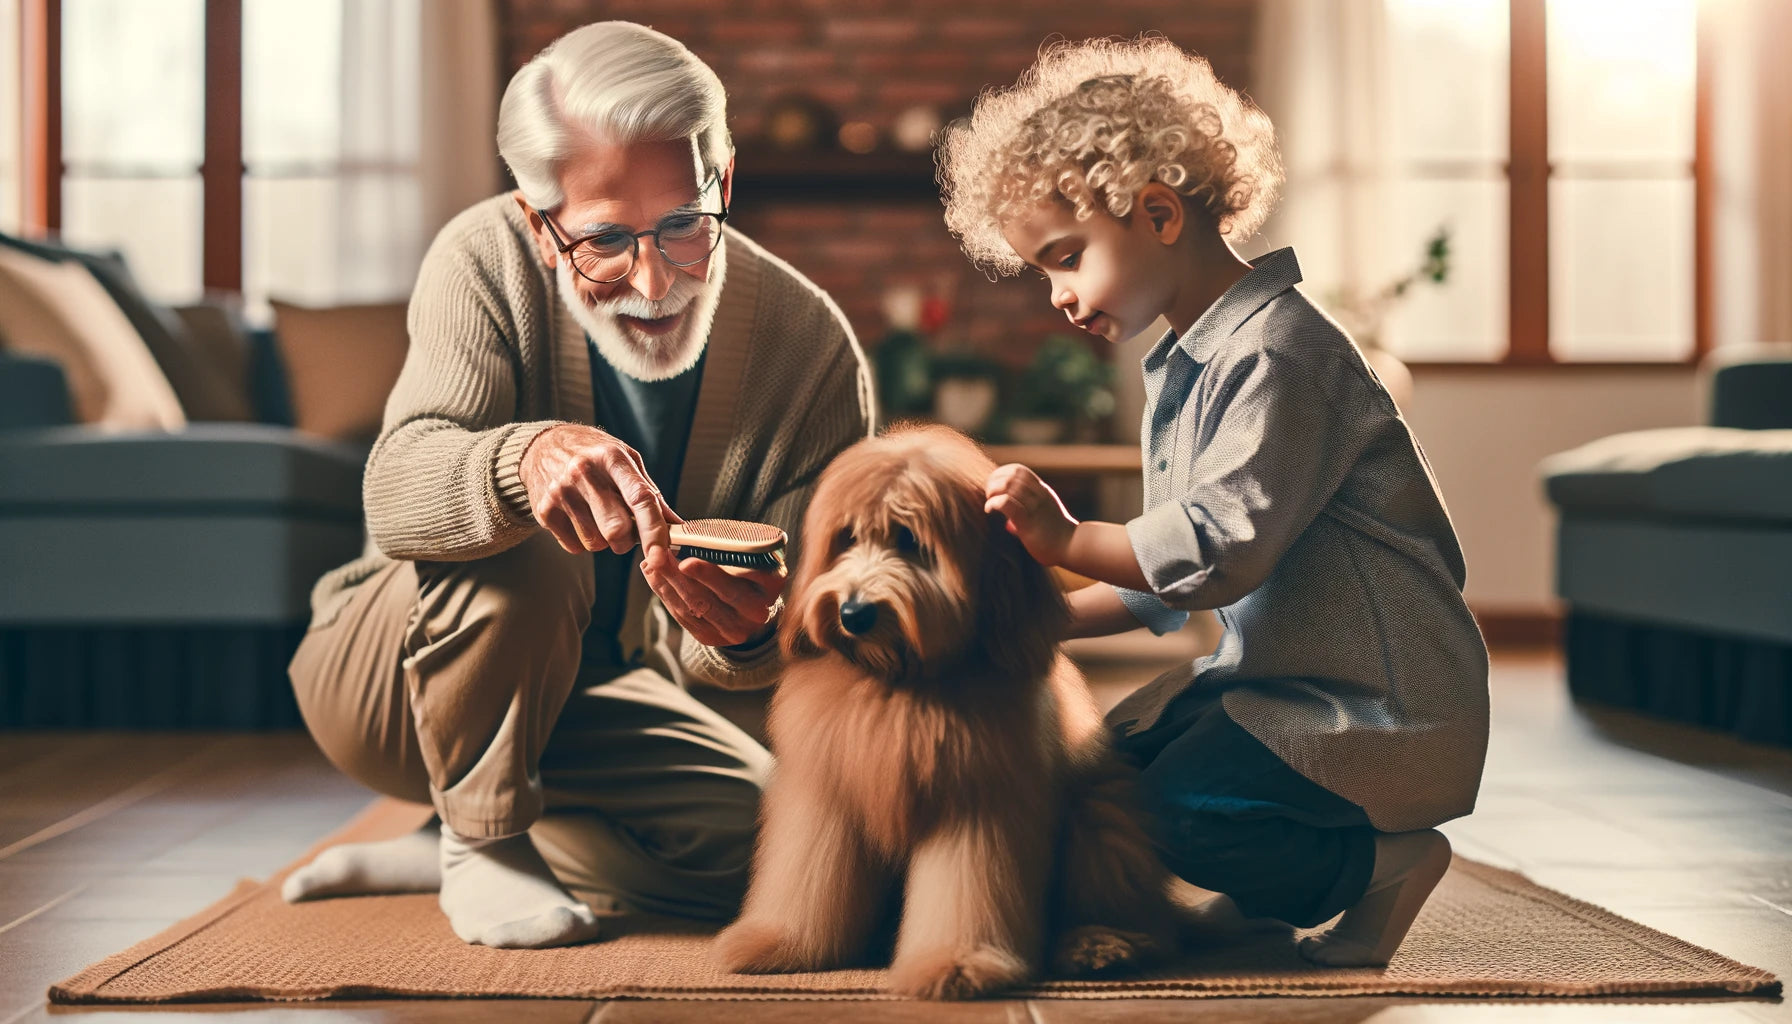 Baby Boomer teaching their grandchild how to care for their Mini Goldendoodle, passing on values of responsibility and compassion.